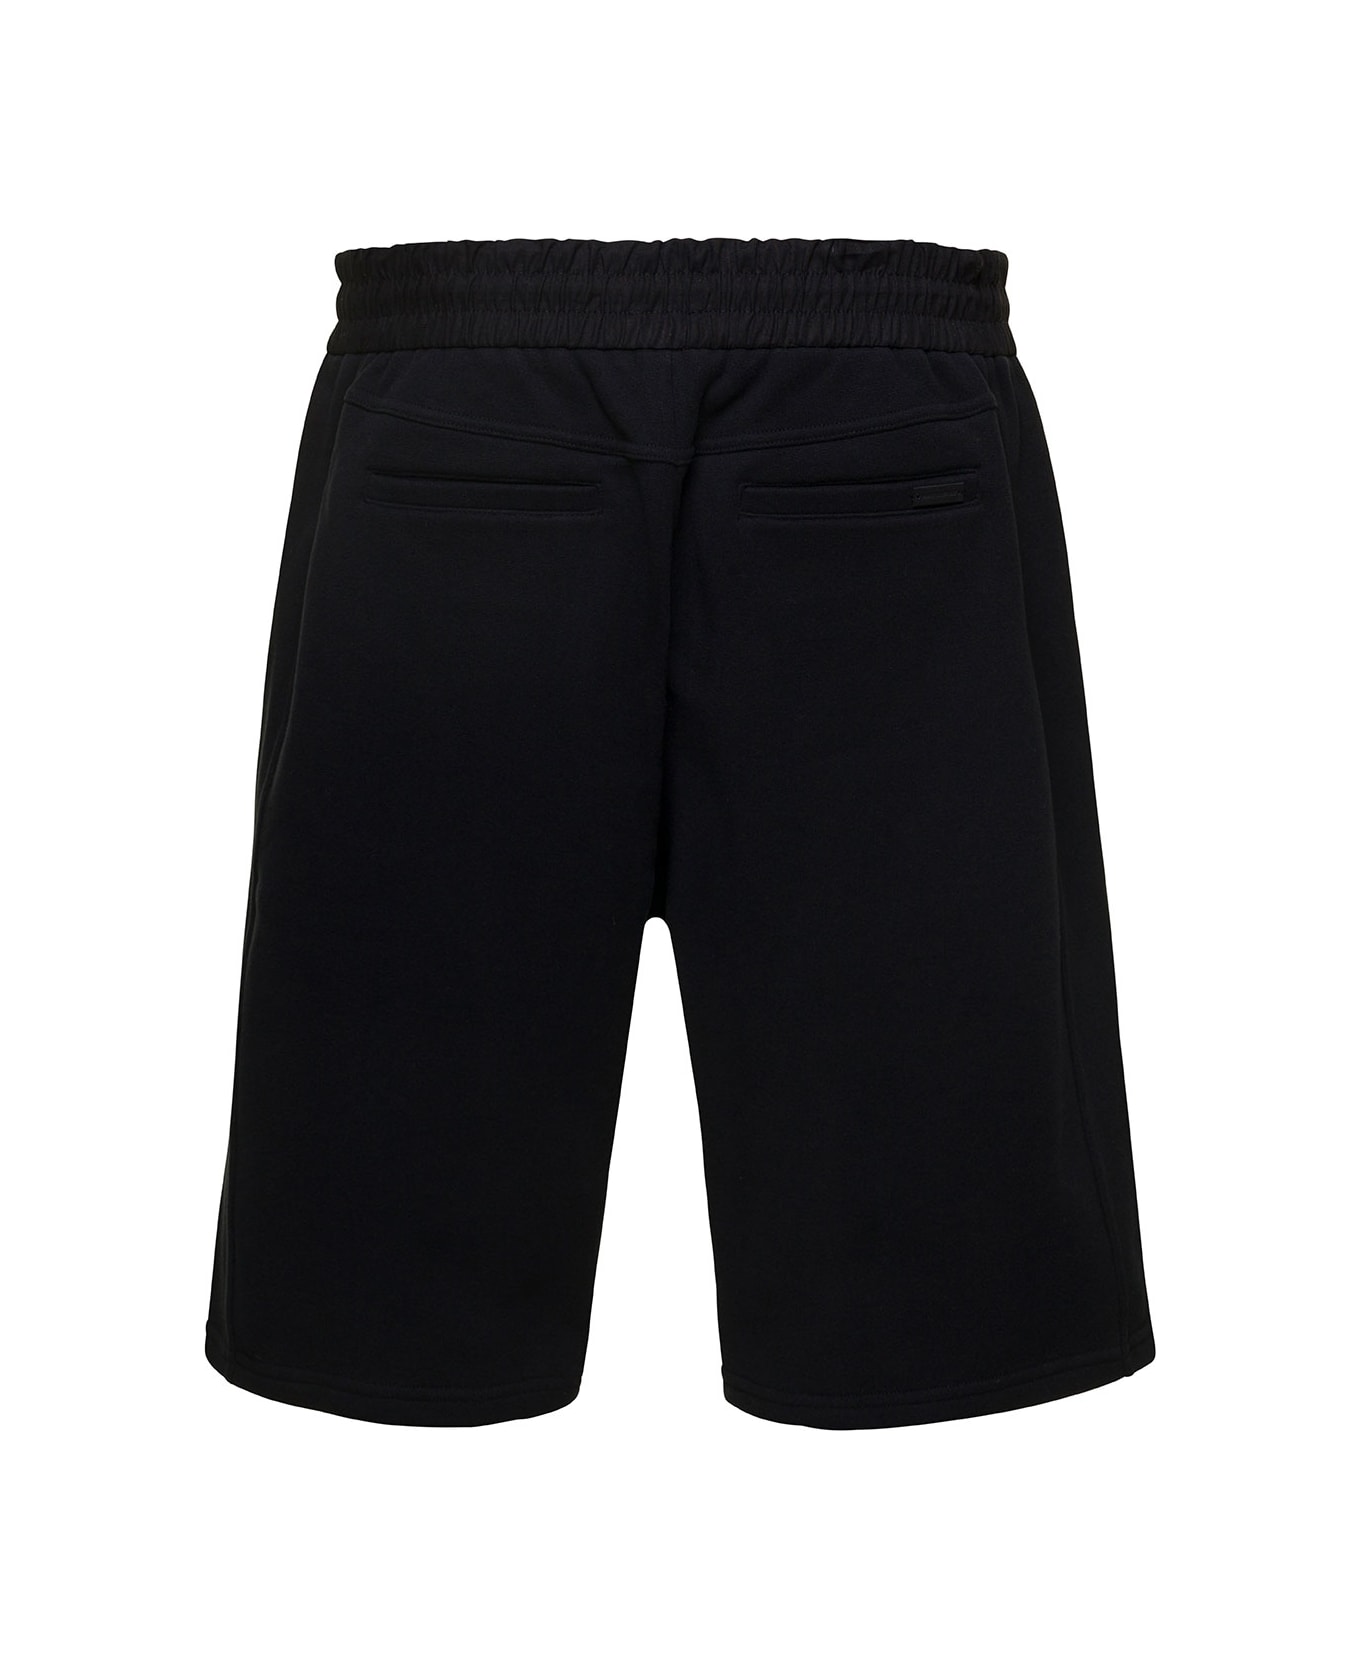 Saint Laurent Black Bermuda Shorts With Drawstring And Contrasting Logo Embroidery In Cotton Man - Black